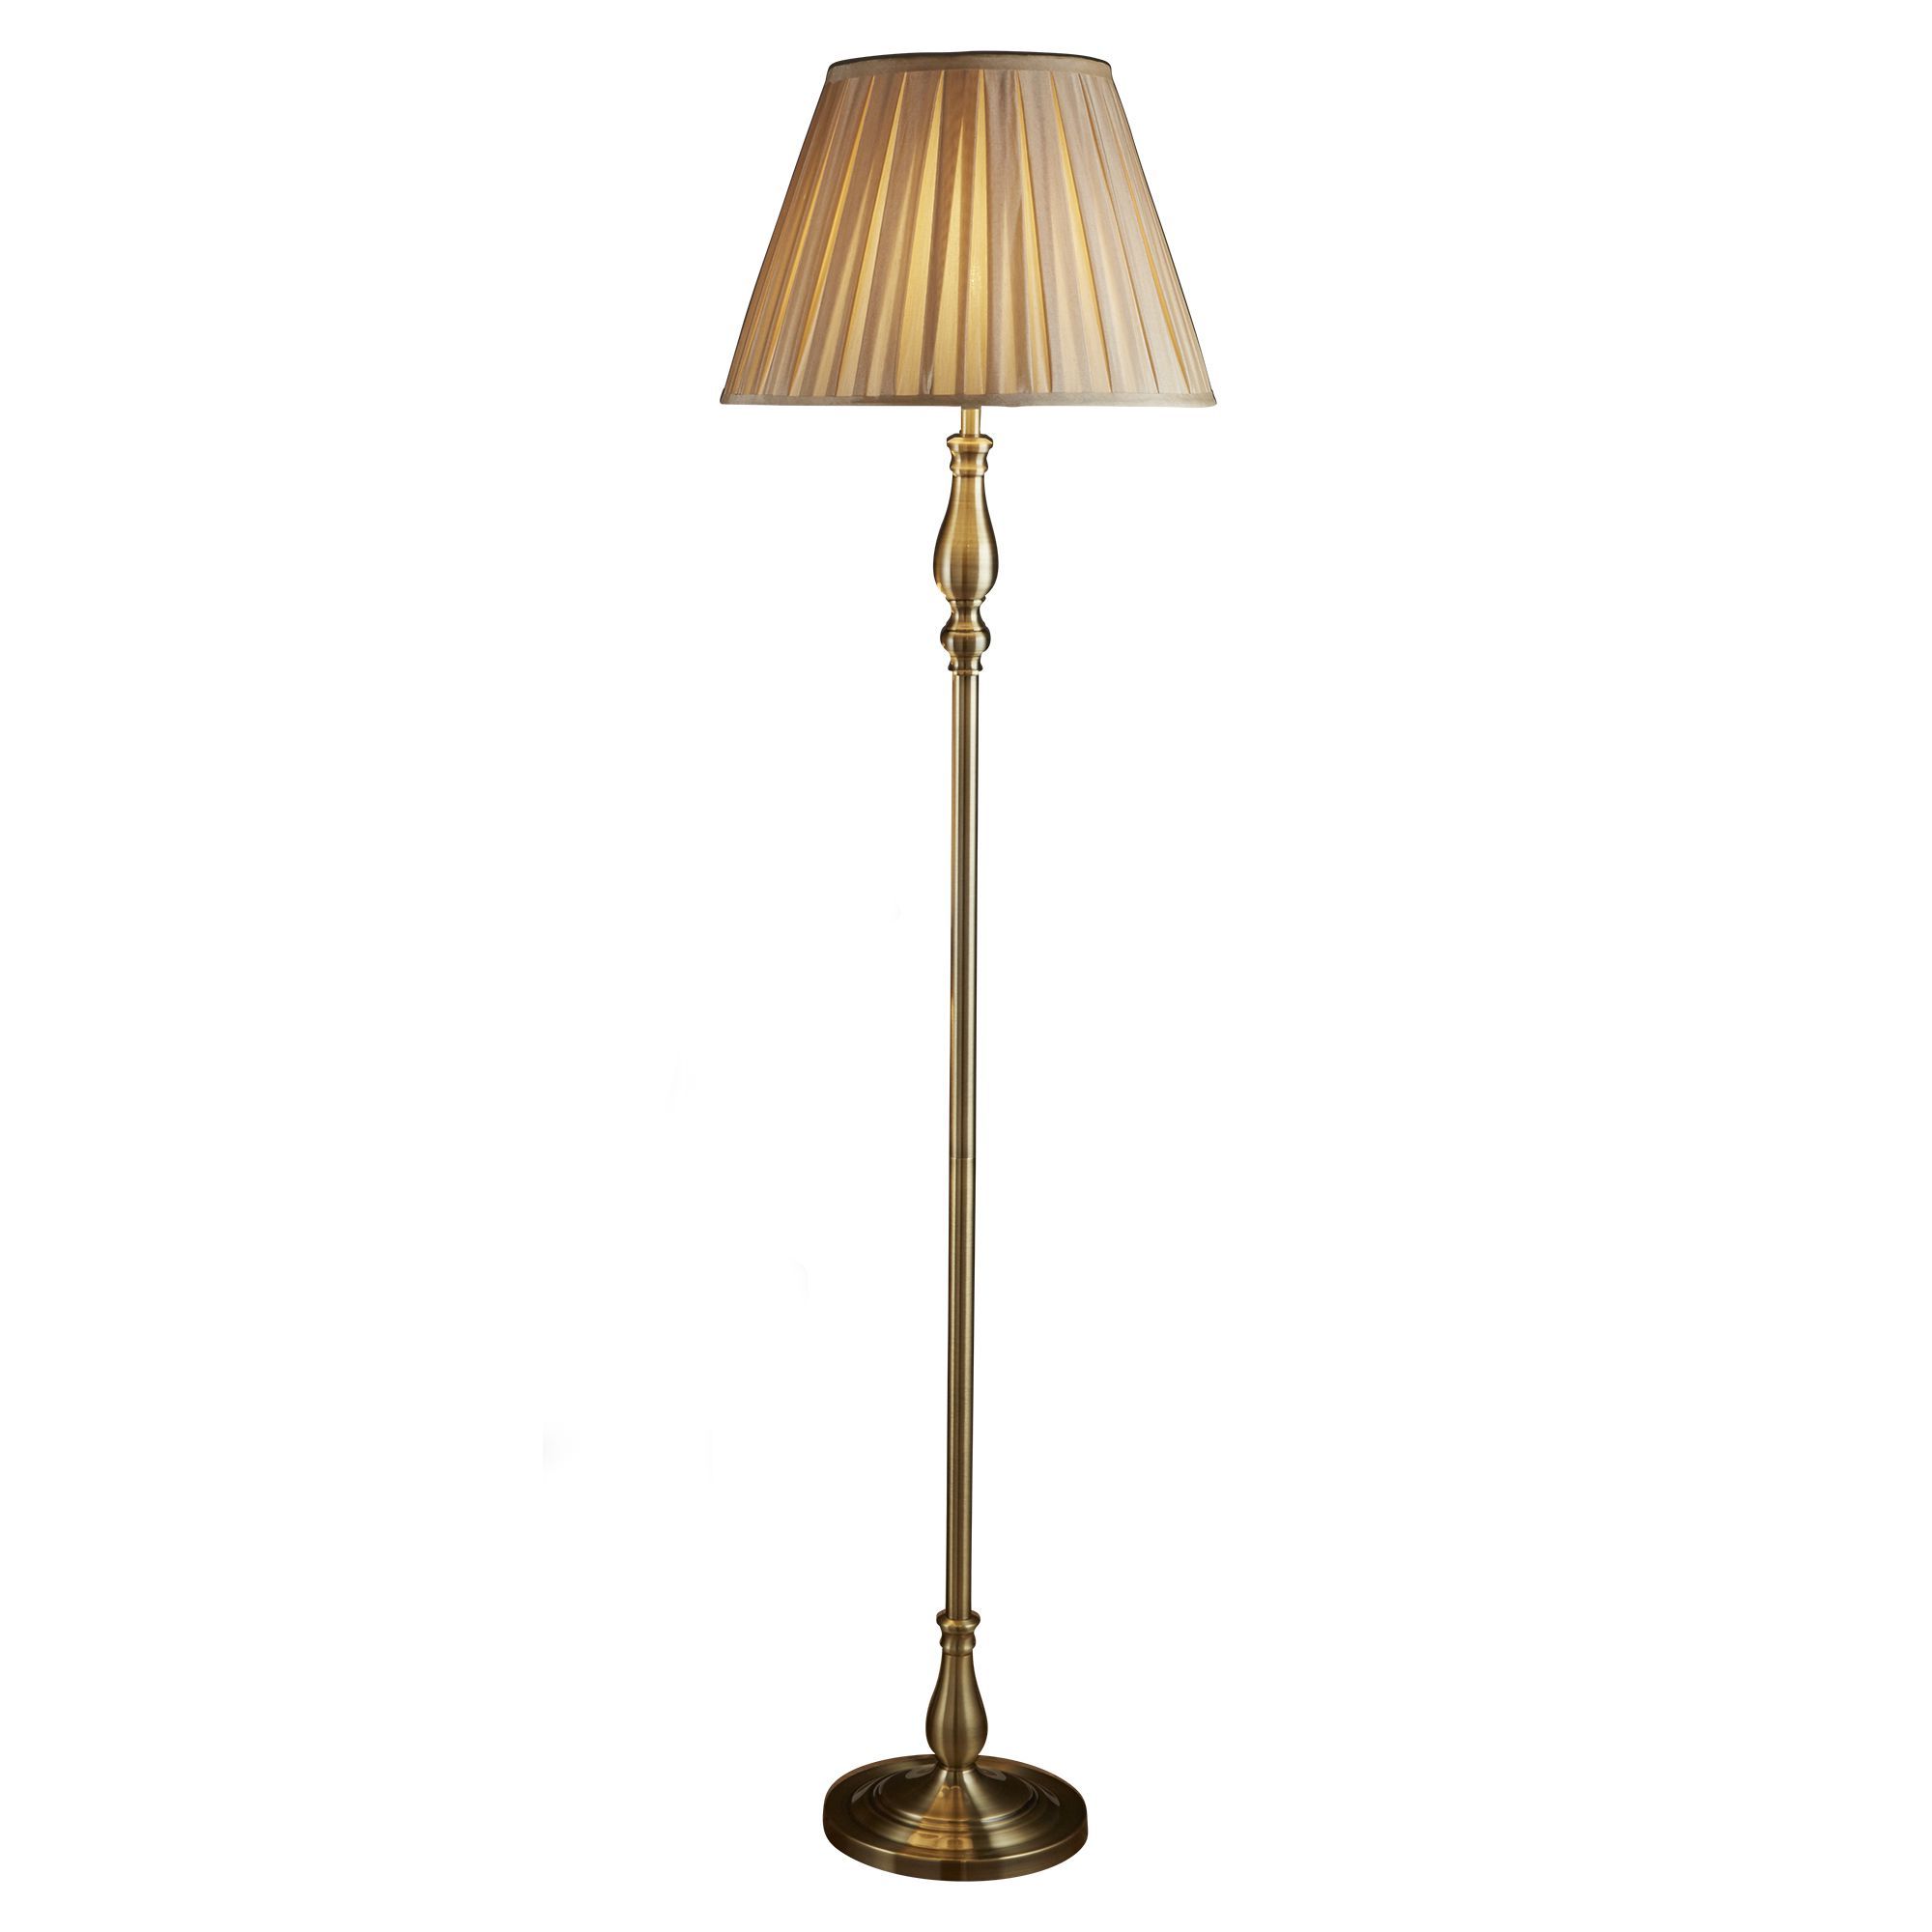 5029ab For Trendy Antique Brass Floor Lamps (View 15 of 15)